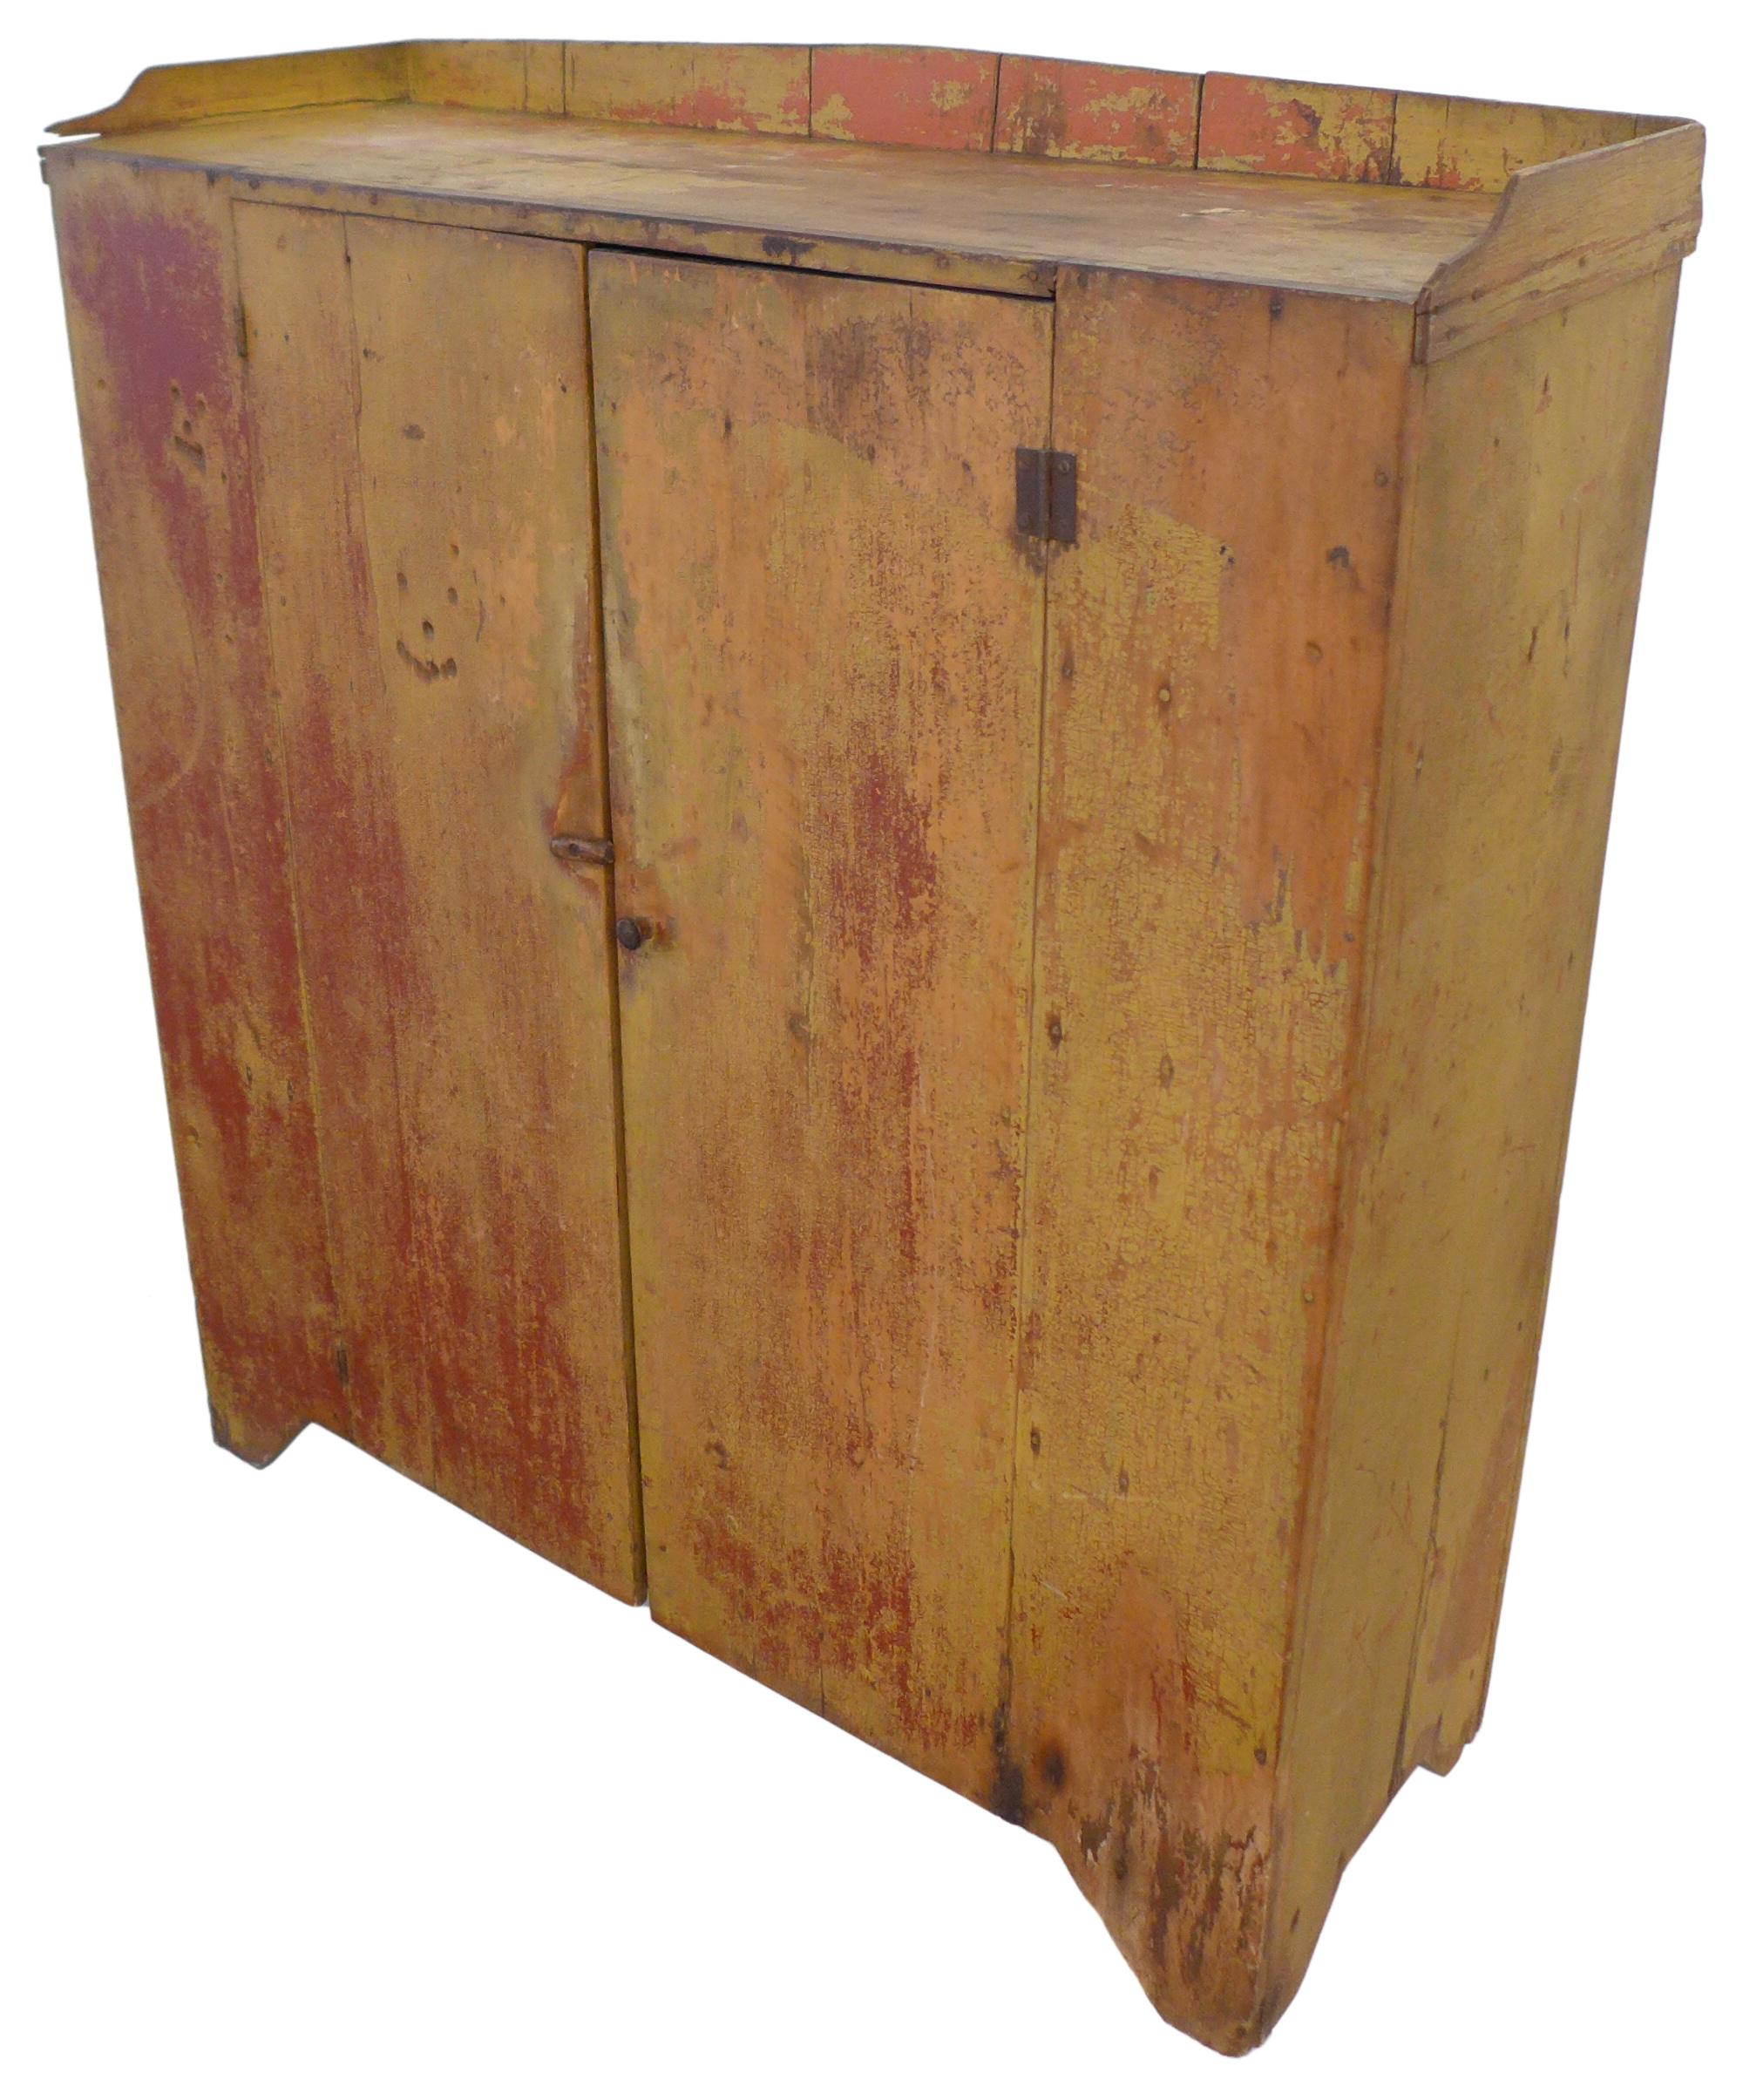 American Rustic Painted Wood Cabinet In Distressed Condition For Sale In Los Angeles, CA